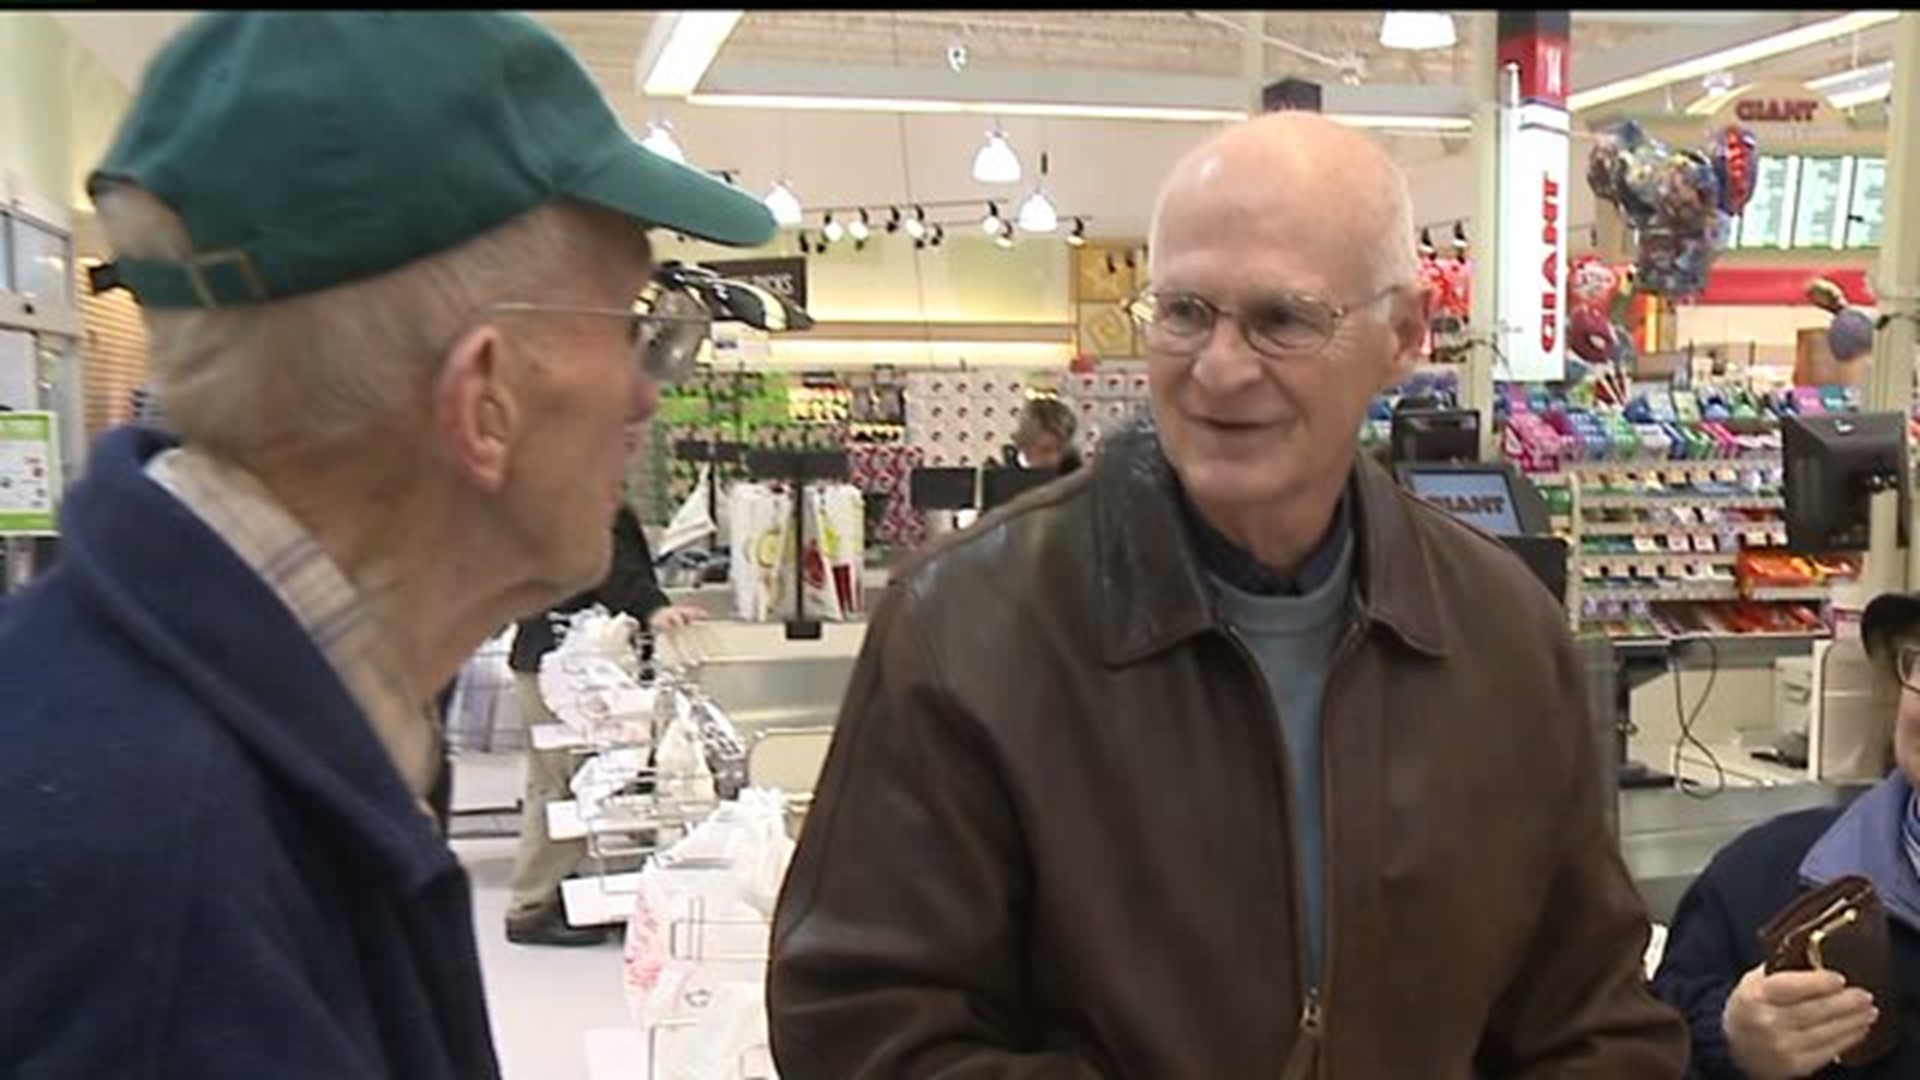 Grocery giver Man picks up the tab for people in need